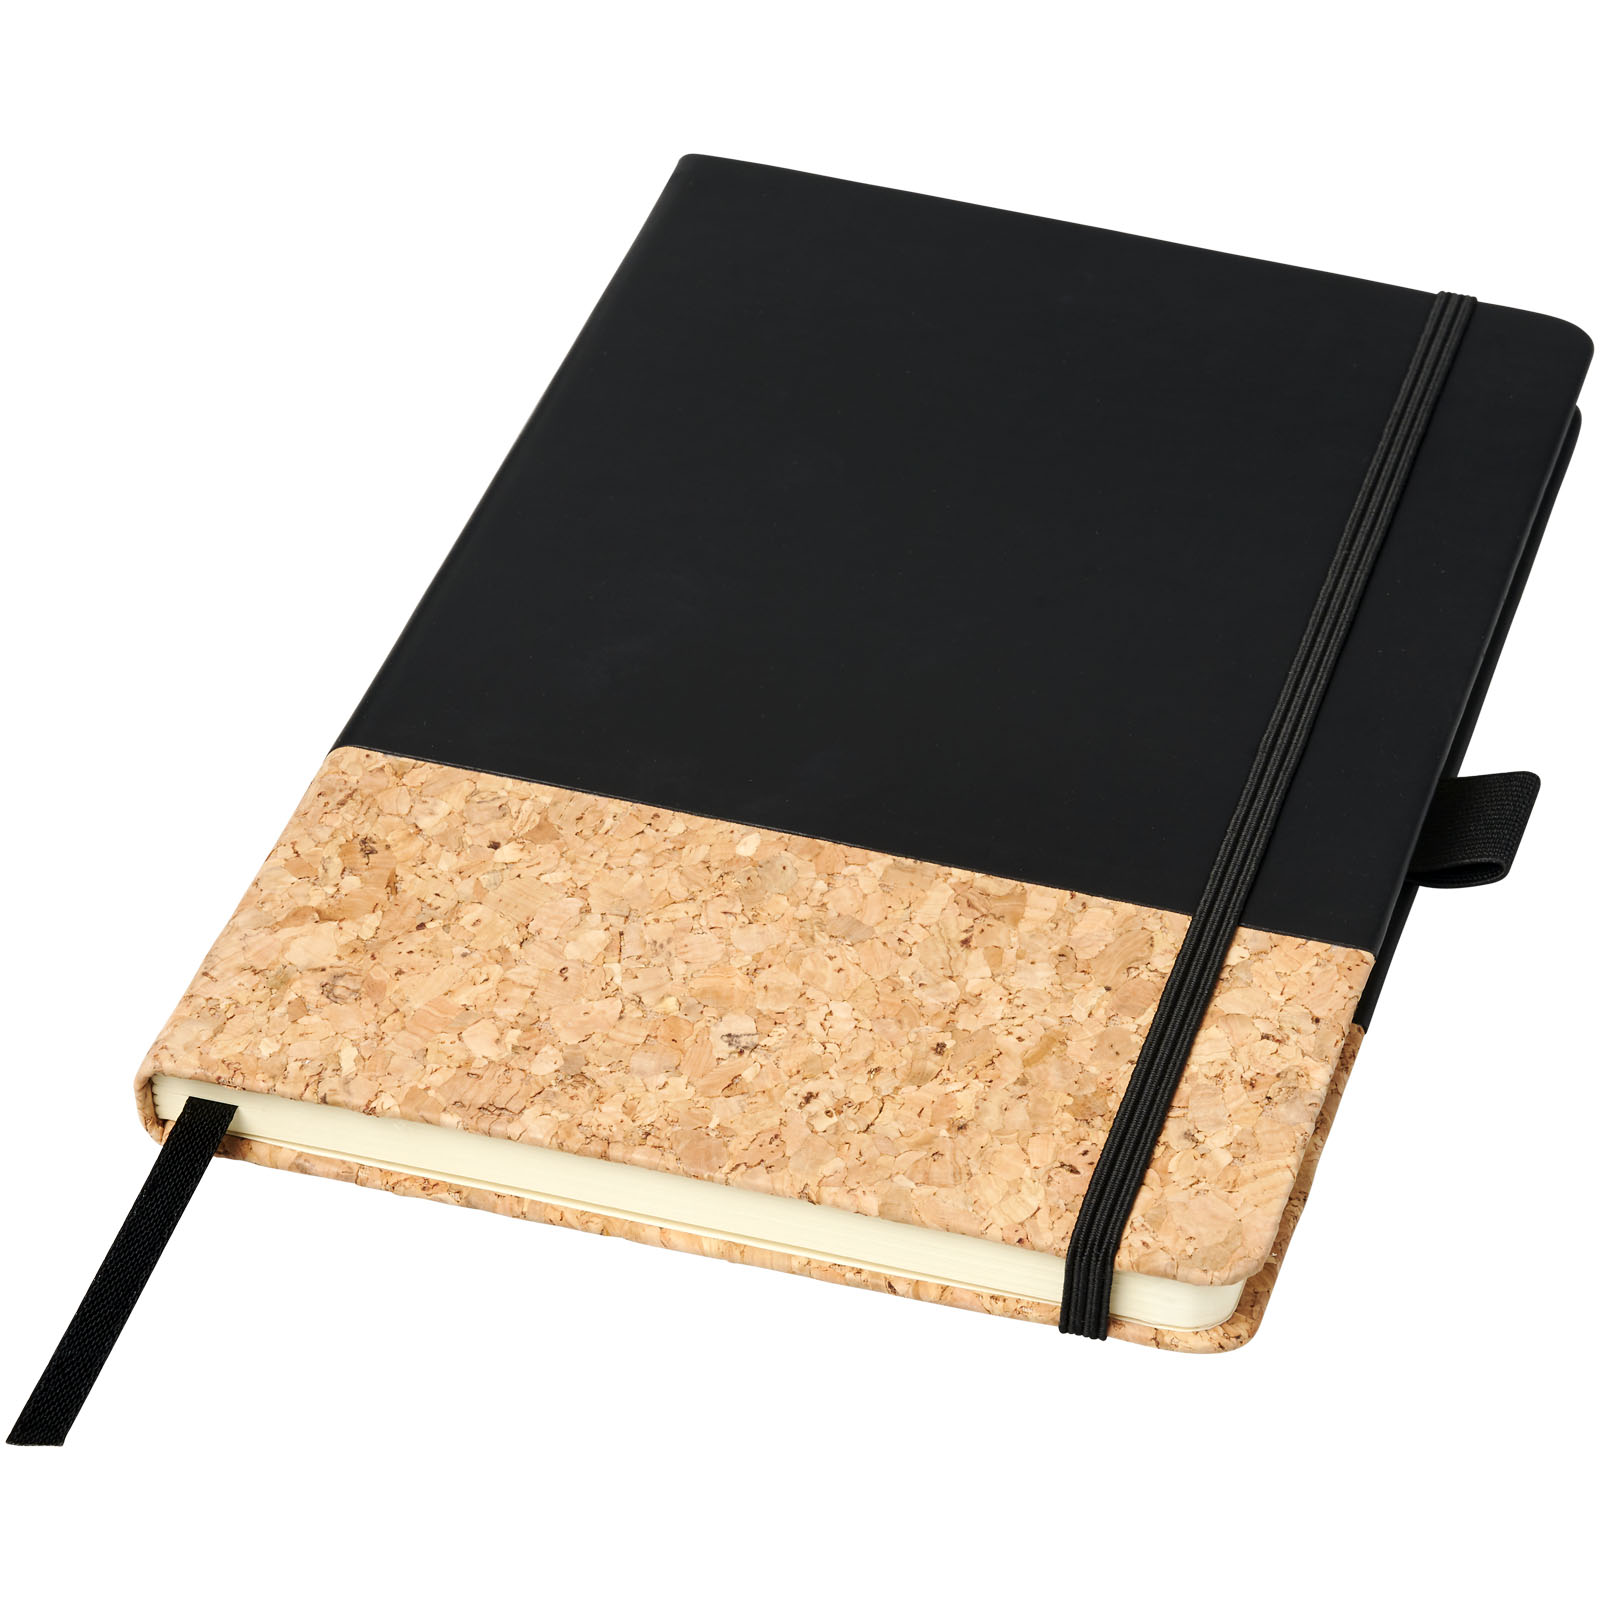 Advertising Hard cover notebooks - Evora A5 cork thermo PU notebook